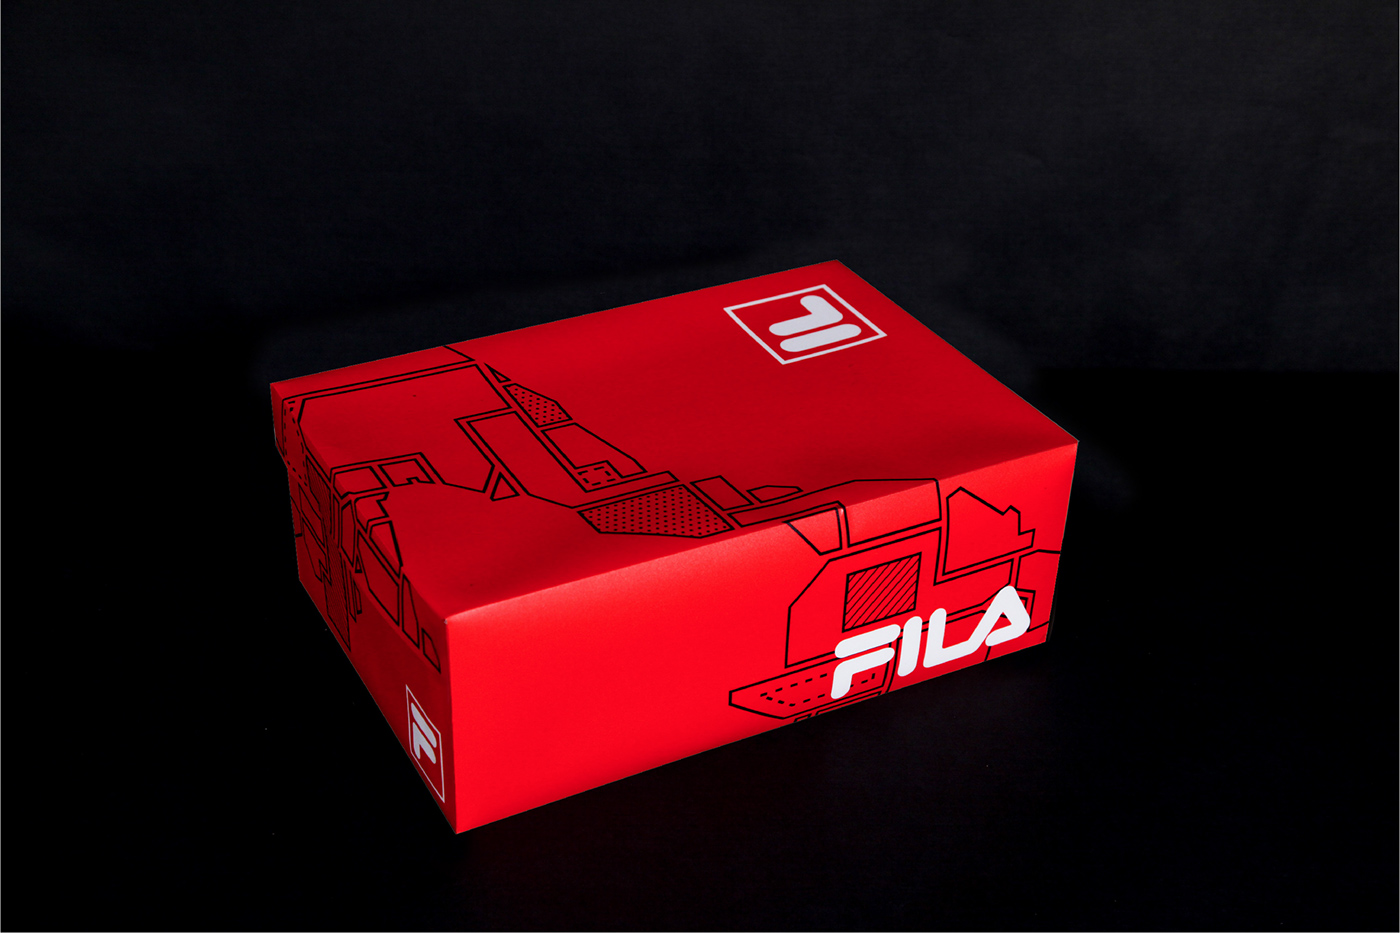 fila sports lifestyle training footwear Packaging Italy India box